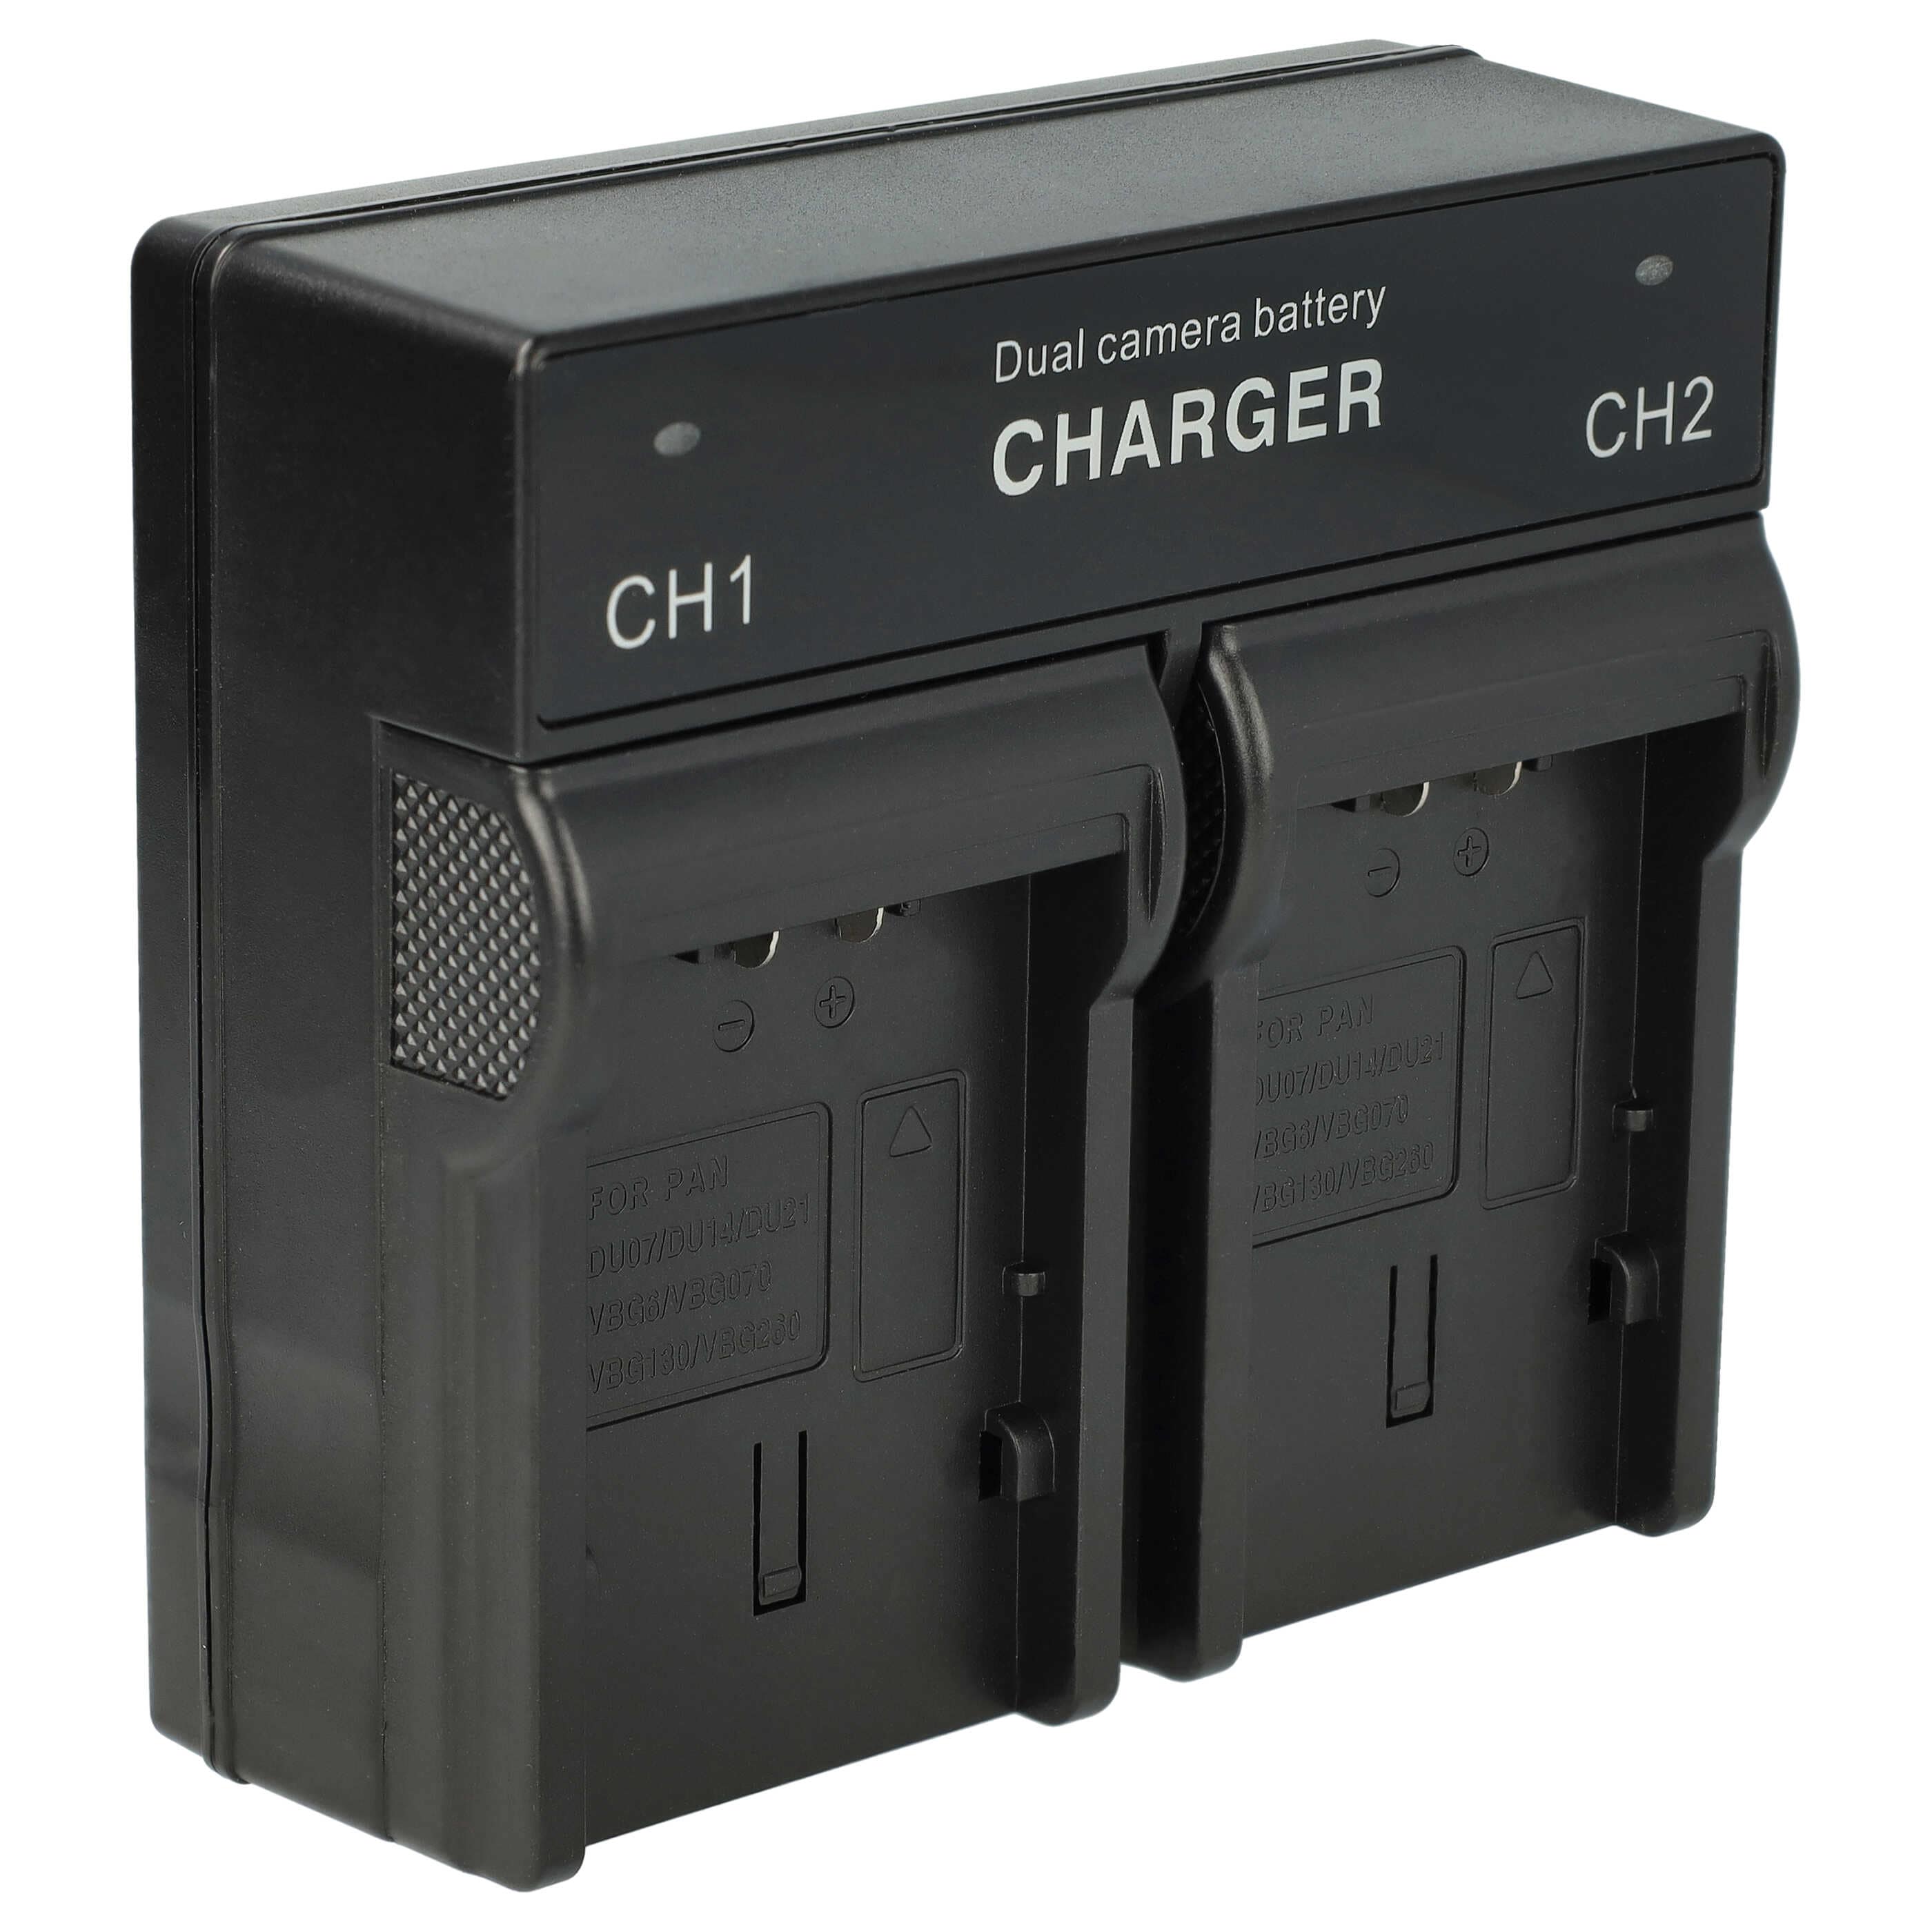 Battery Charger suitable for DZ-MV350A Camera etc. - 0.5 / 0.9 A, 4.2/8.4 V